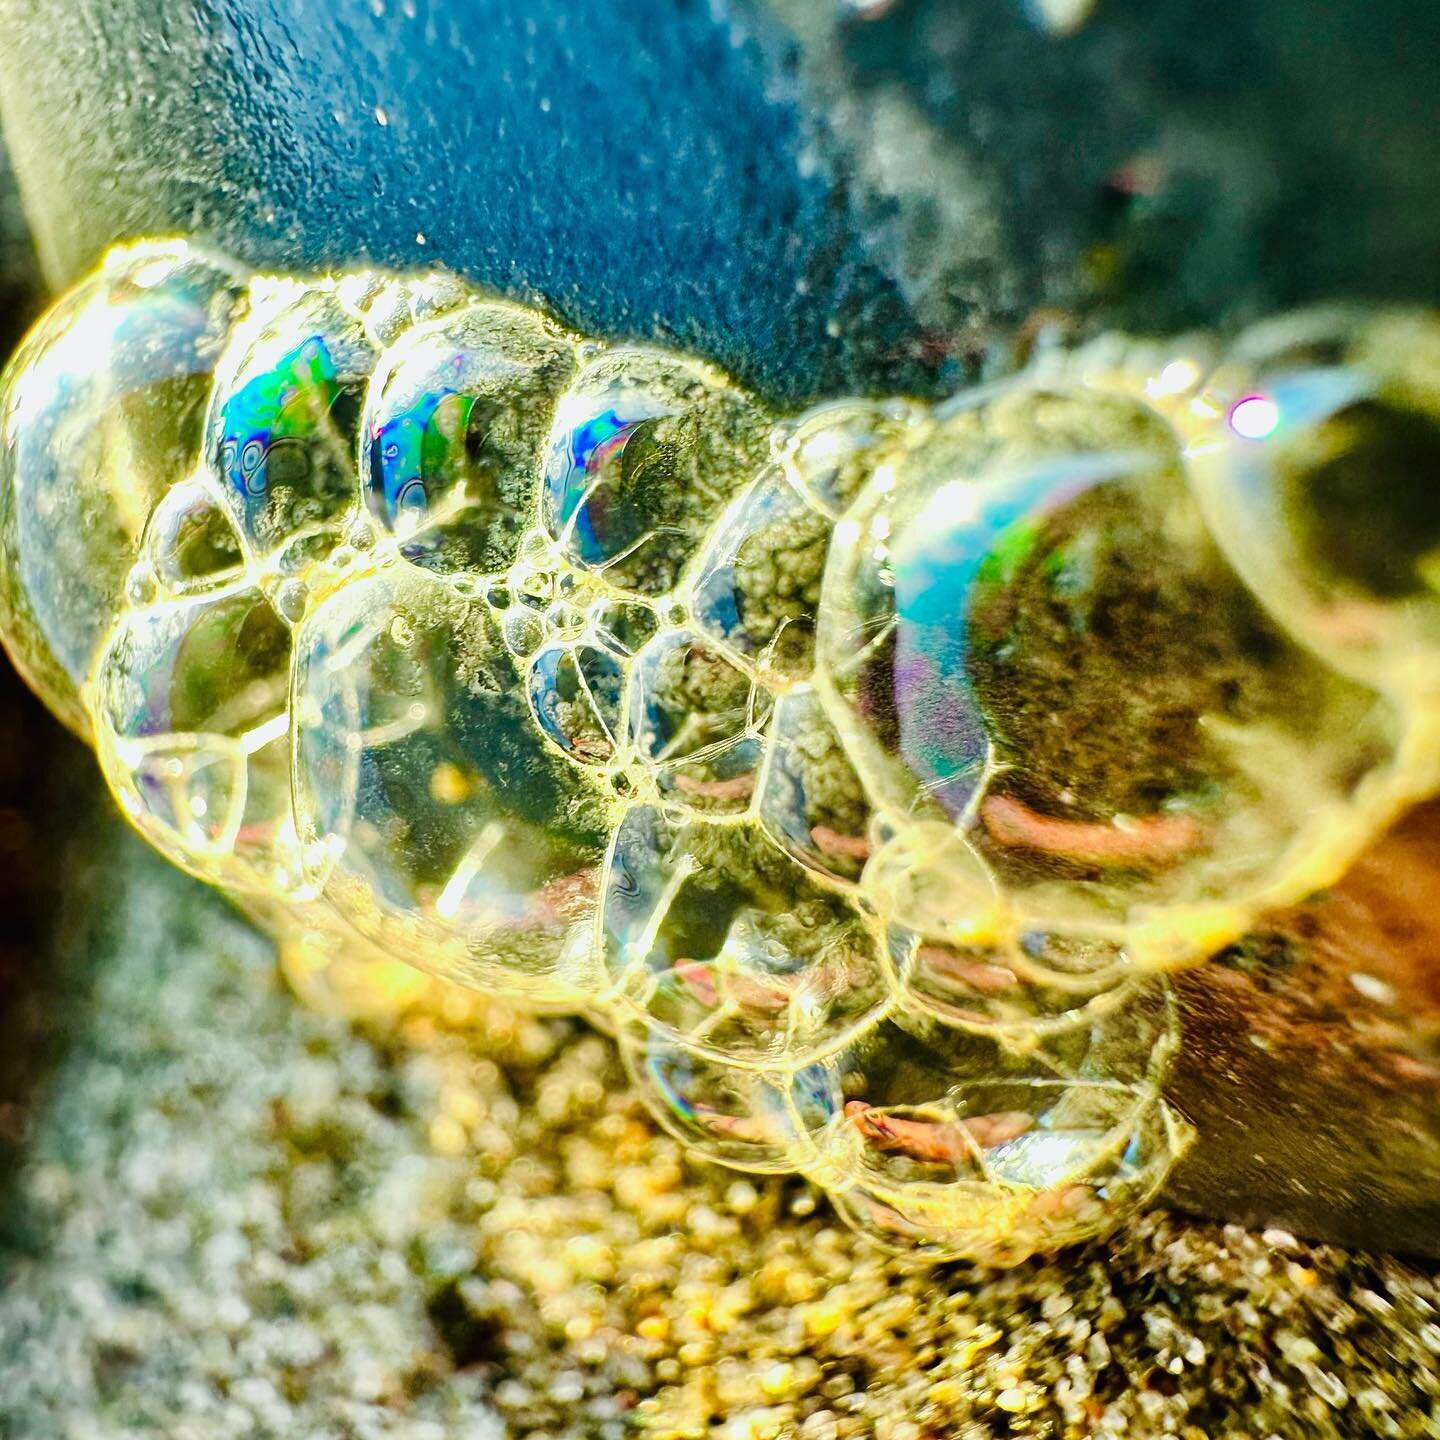 Bubbles reflecting the light of sunset on the shore of the Pacific Ocean and all of a sudden, anything is possible. 

#realtobeach #pacificocean #washington #olympicpeninsula #bubbles #rainbows #rocks #sand #reflection #photography #macro #art